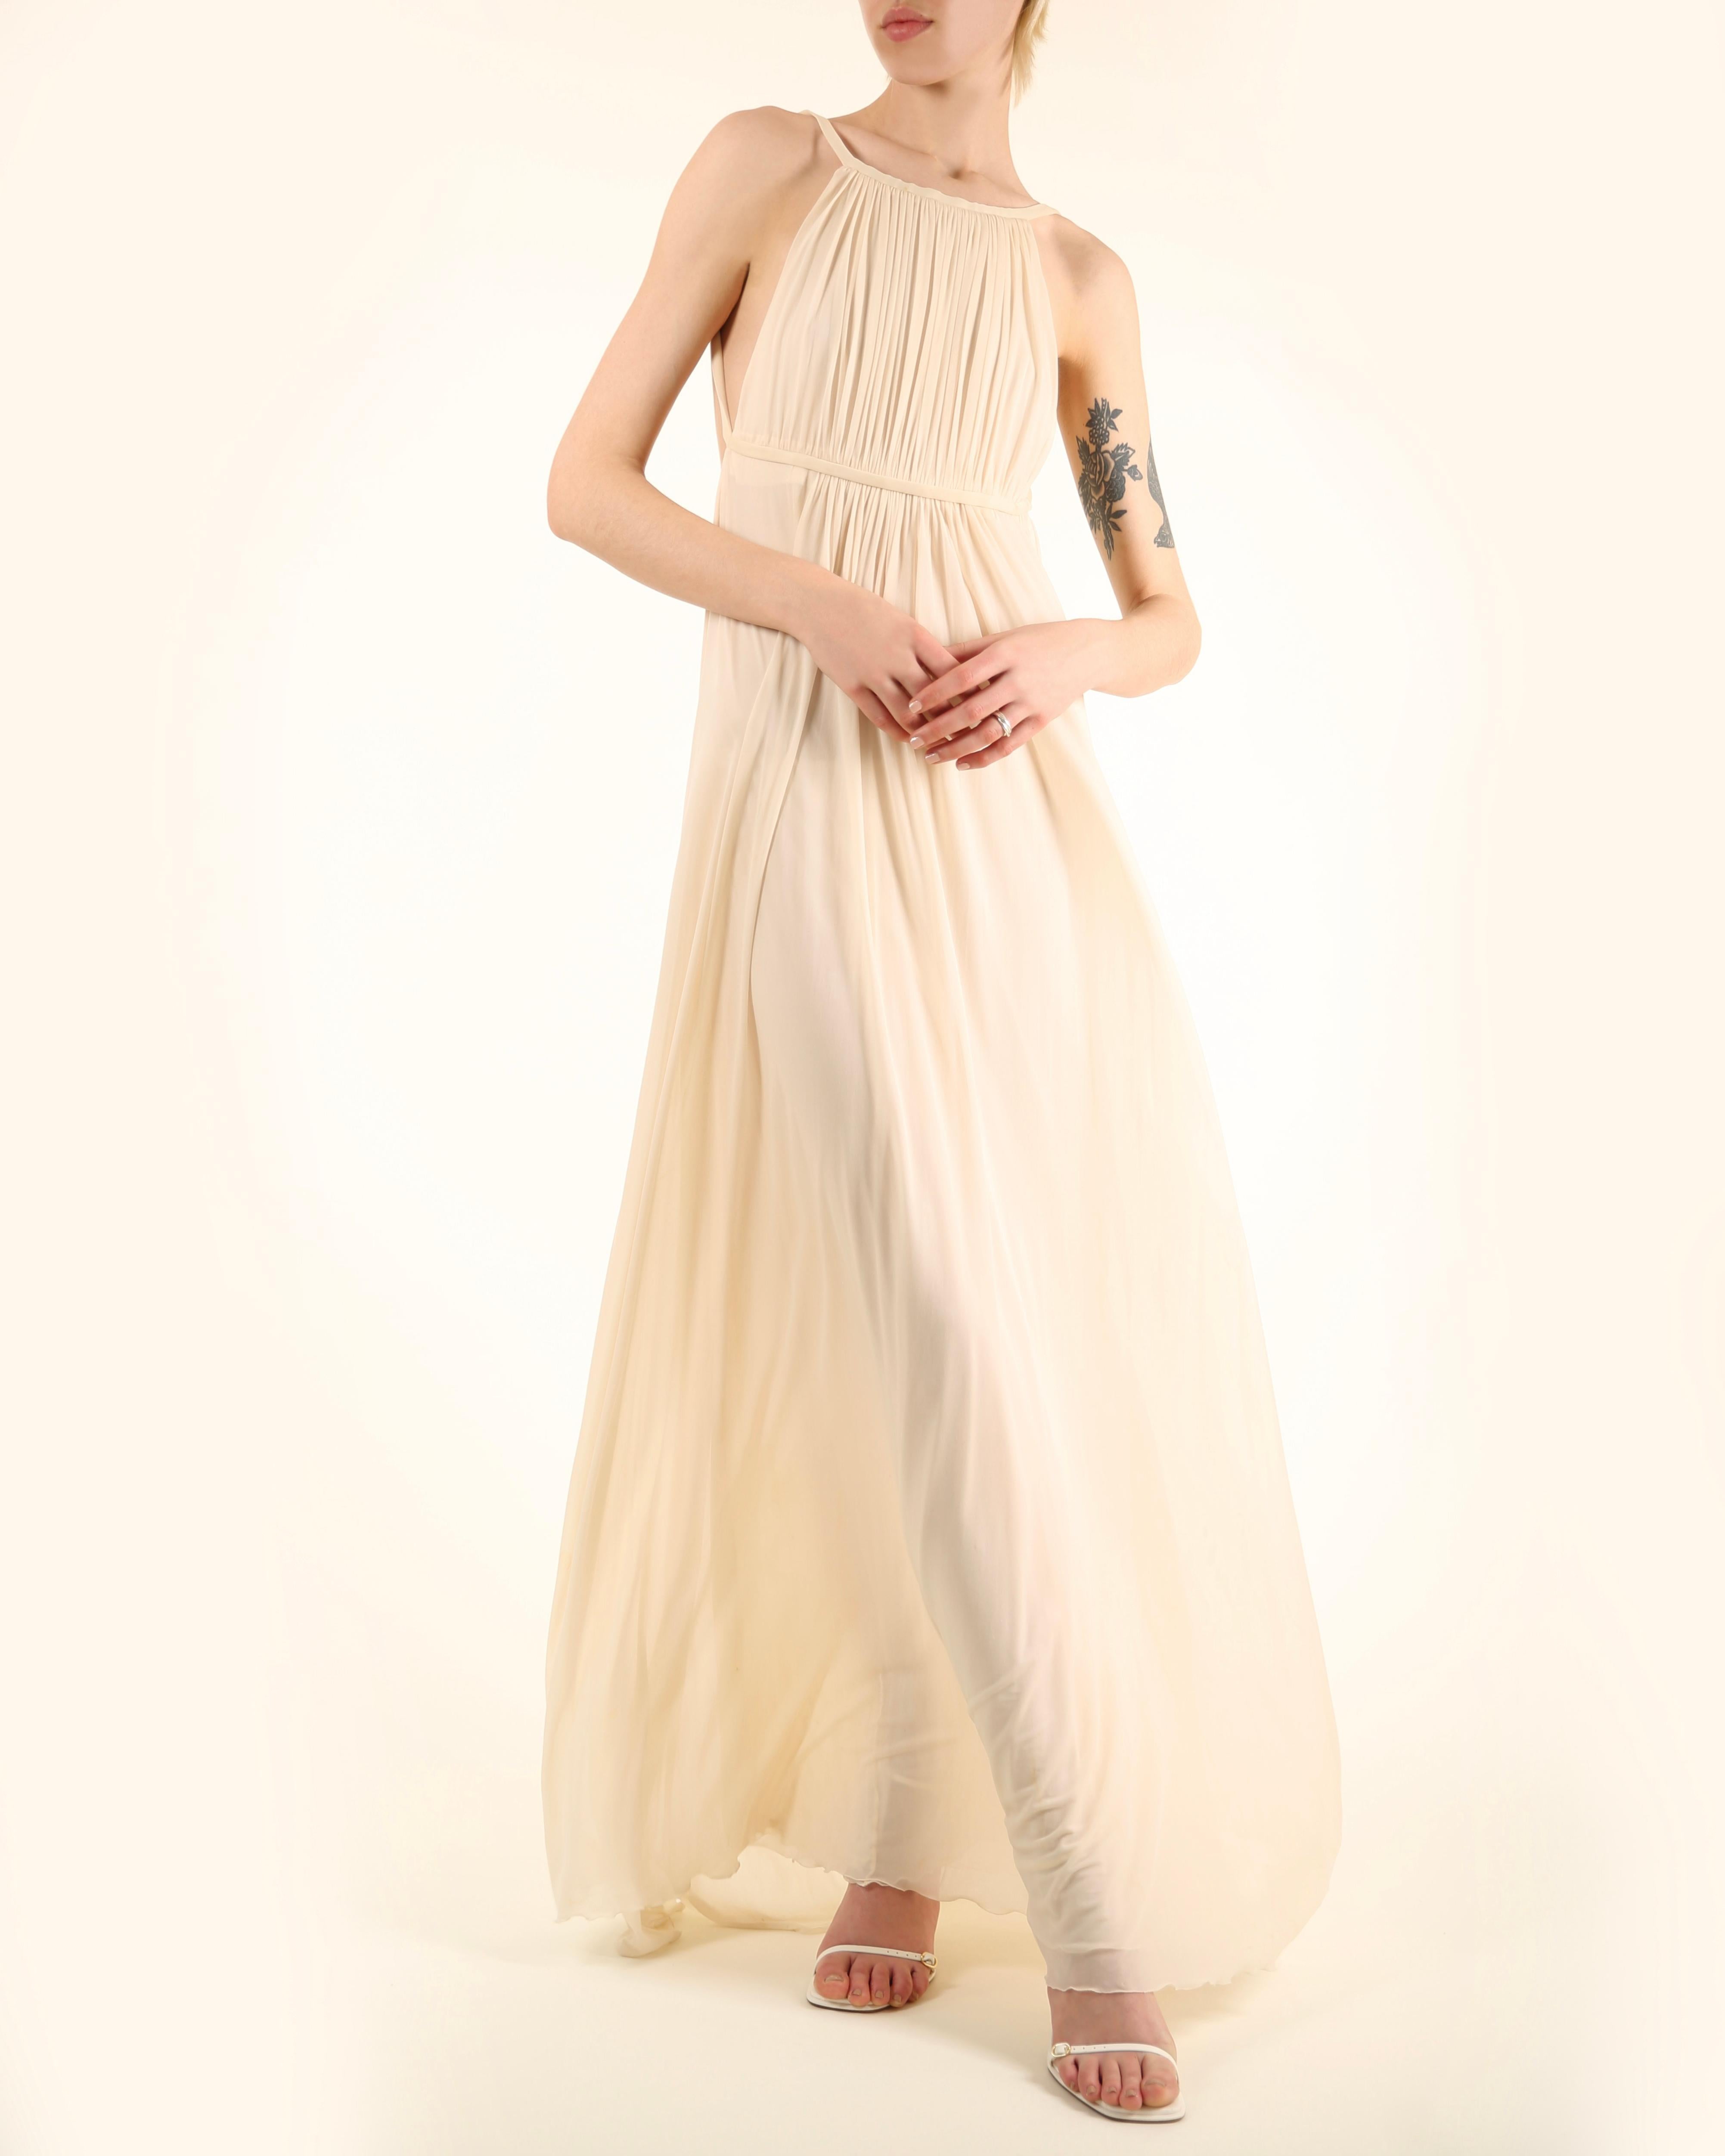 Halston 09 ivory cream plisse grecian style backless wedding maxi dress gown 42 For Sale 4